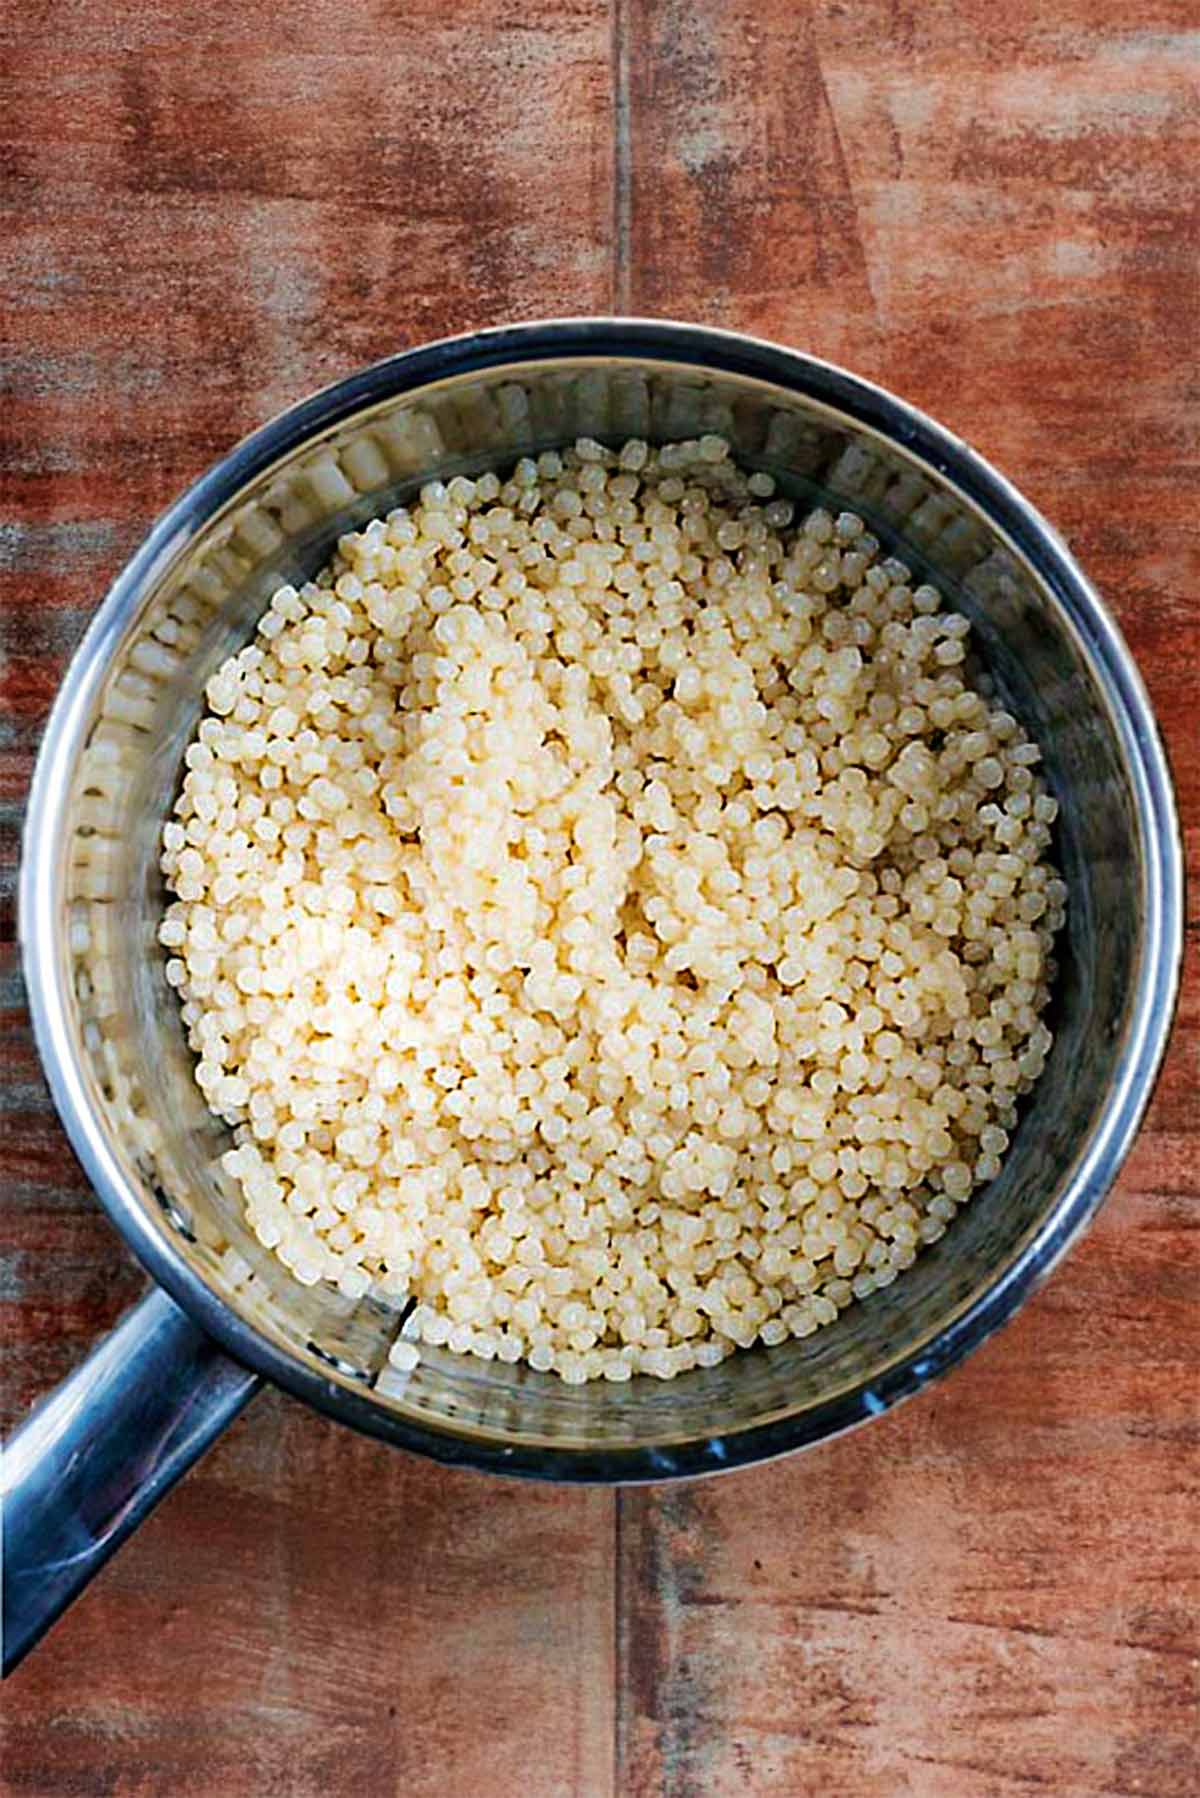 A stainless steel saucepan containing cooled Israeli couscous.